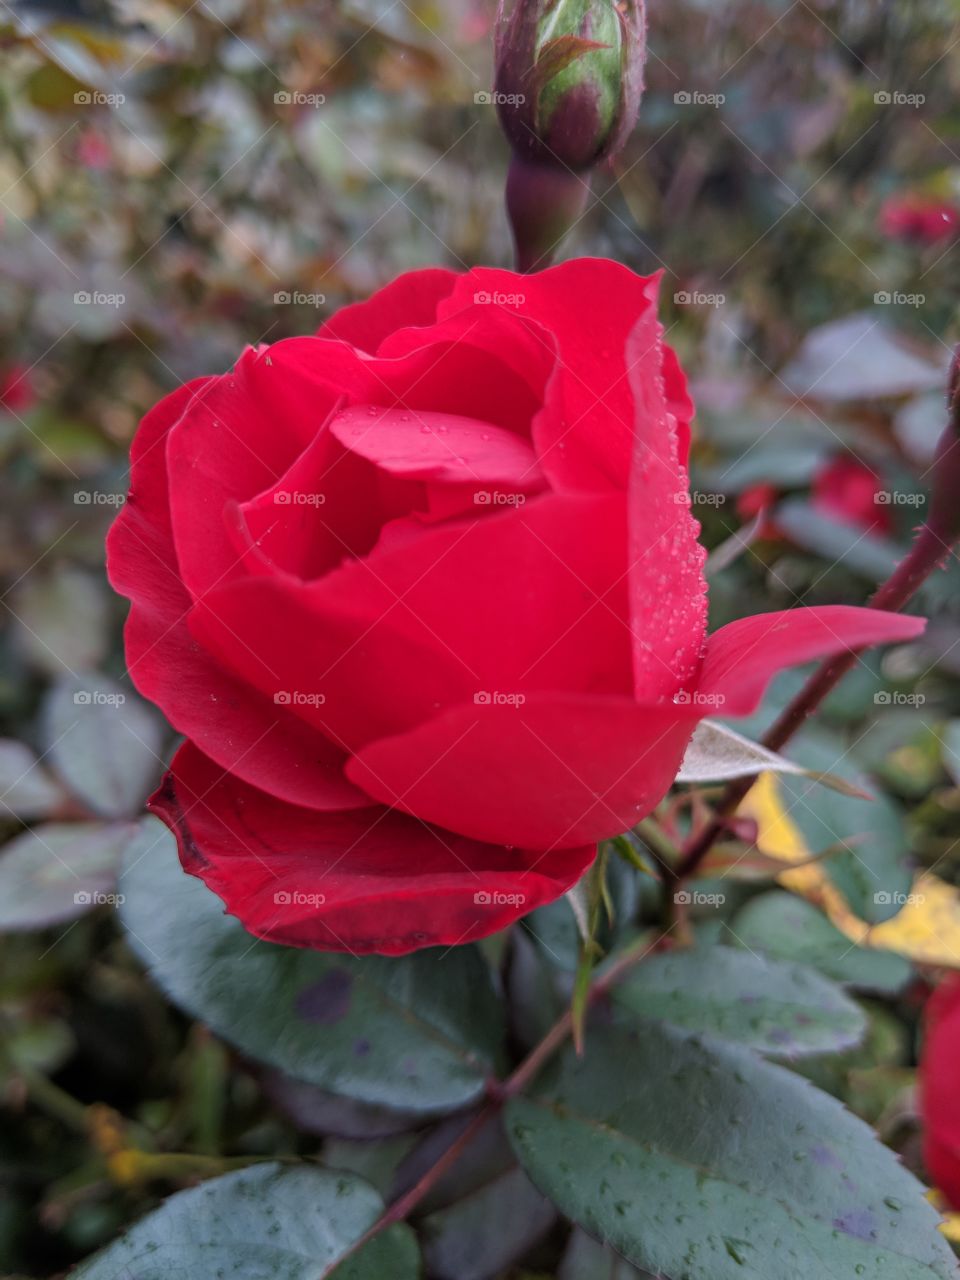 A beautiful, vibrant rose captured during a scenic walk. A perfect addition to the collection of any romance enthusiast!